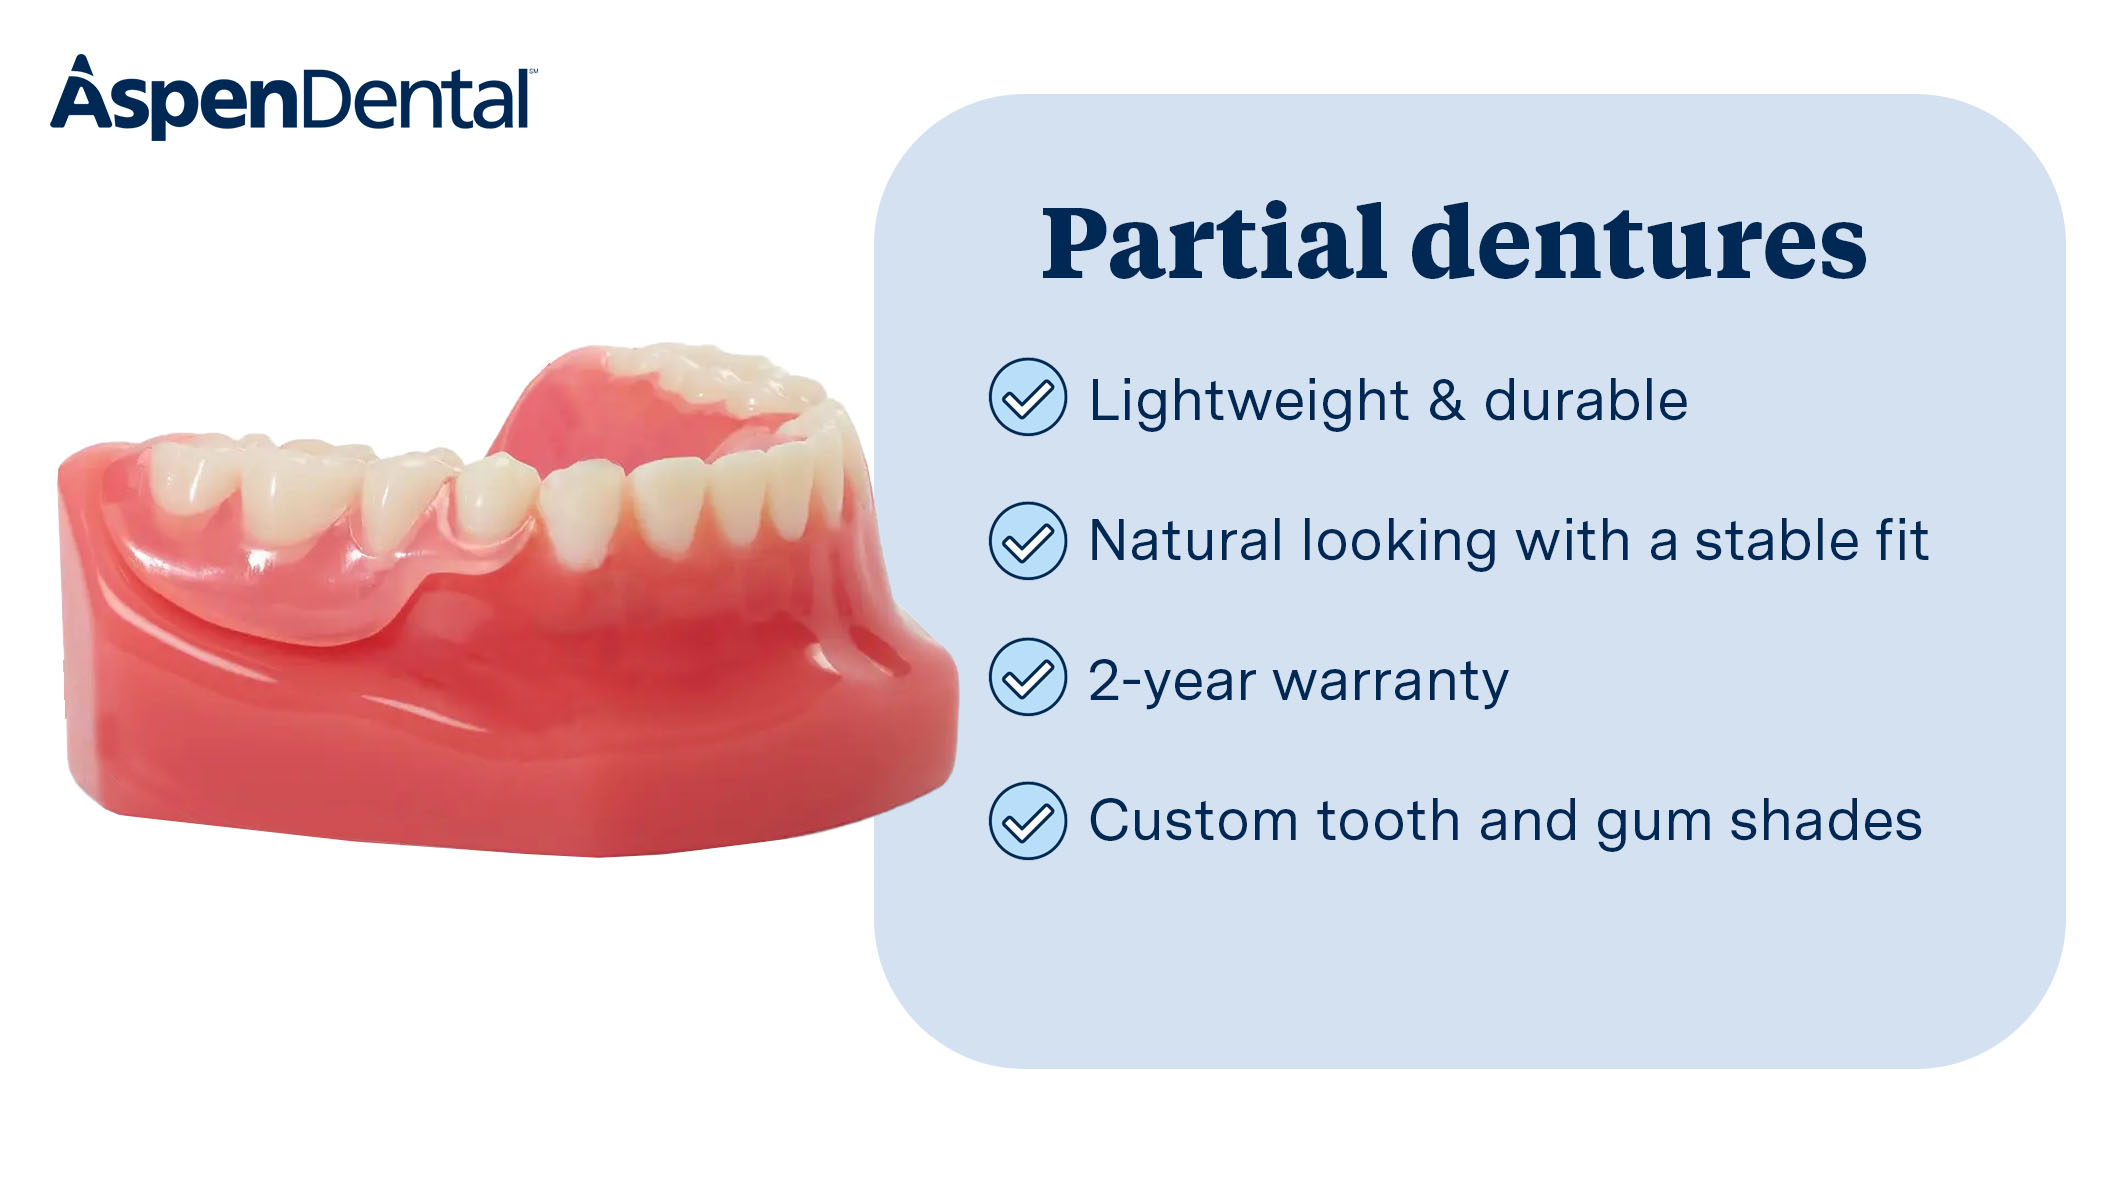 Restore your smile with our customizable partial dentures. Lightweight, durable, natural-looking, an Aspen Dental - Milton, FL - Pace Milton (850)602-9033